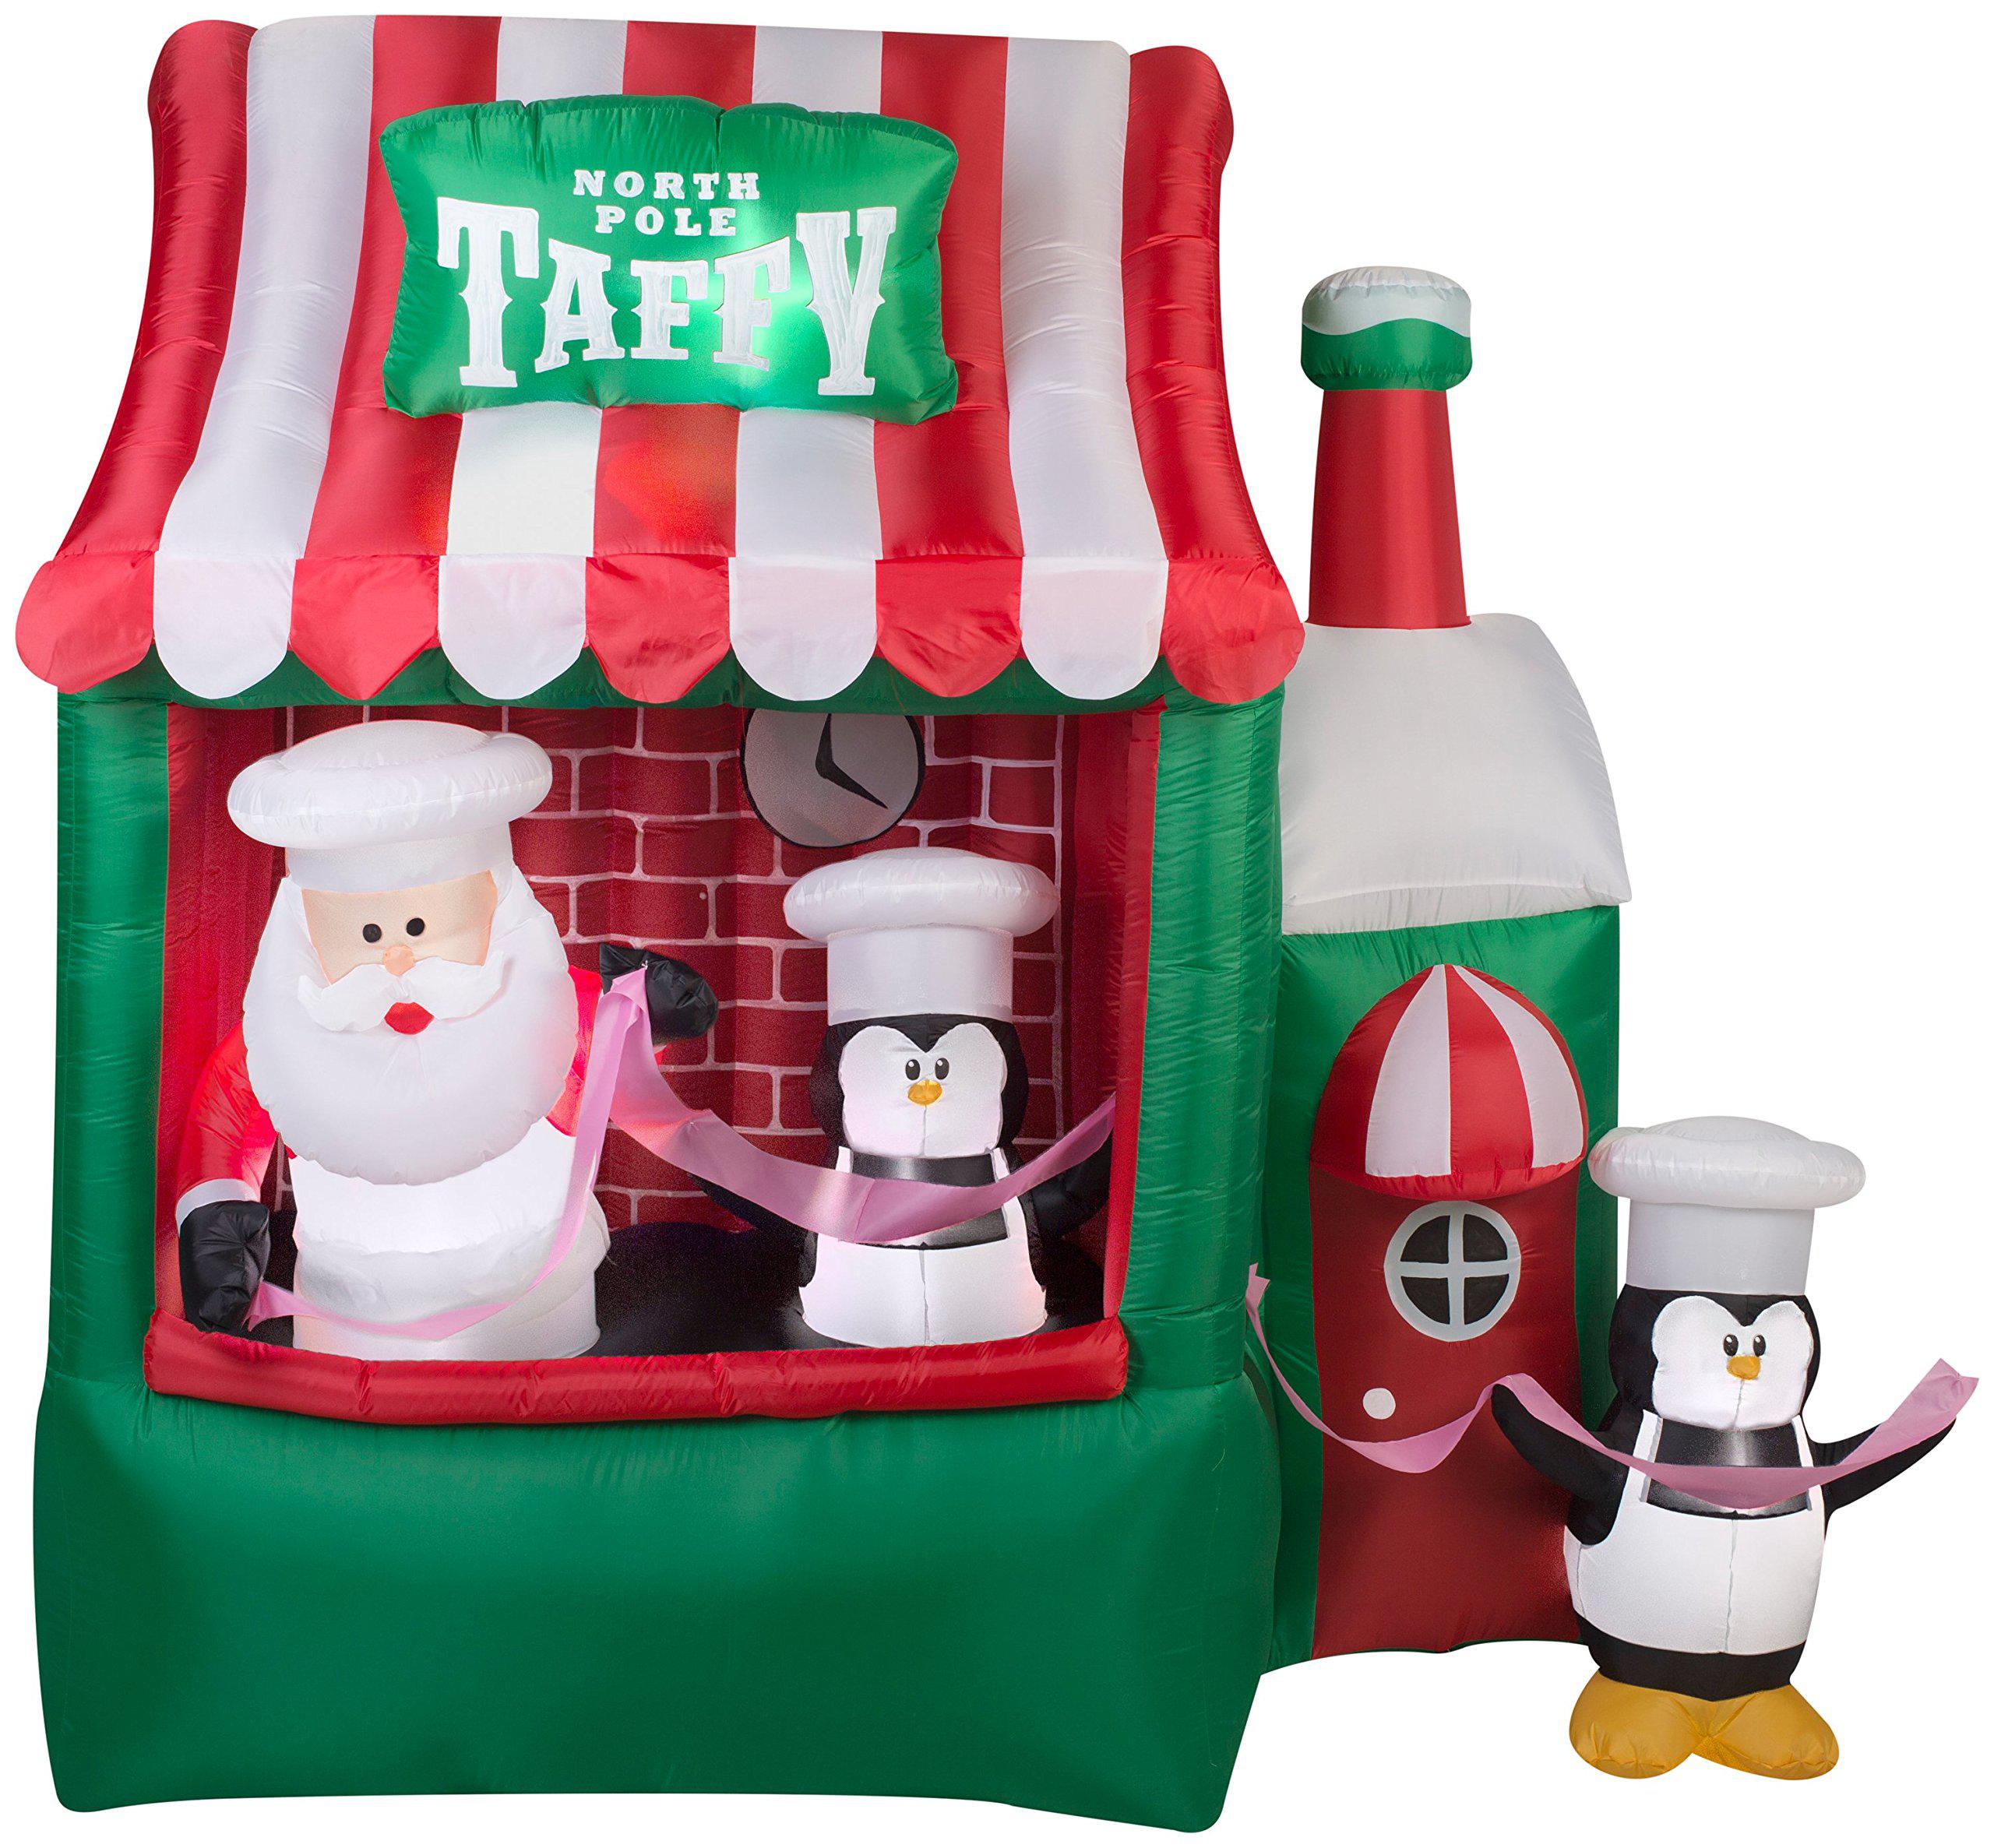 gemmy 7.25' animated airblown north pole taffy stand christmas inflatable